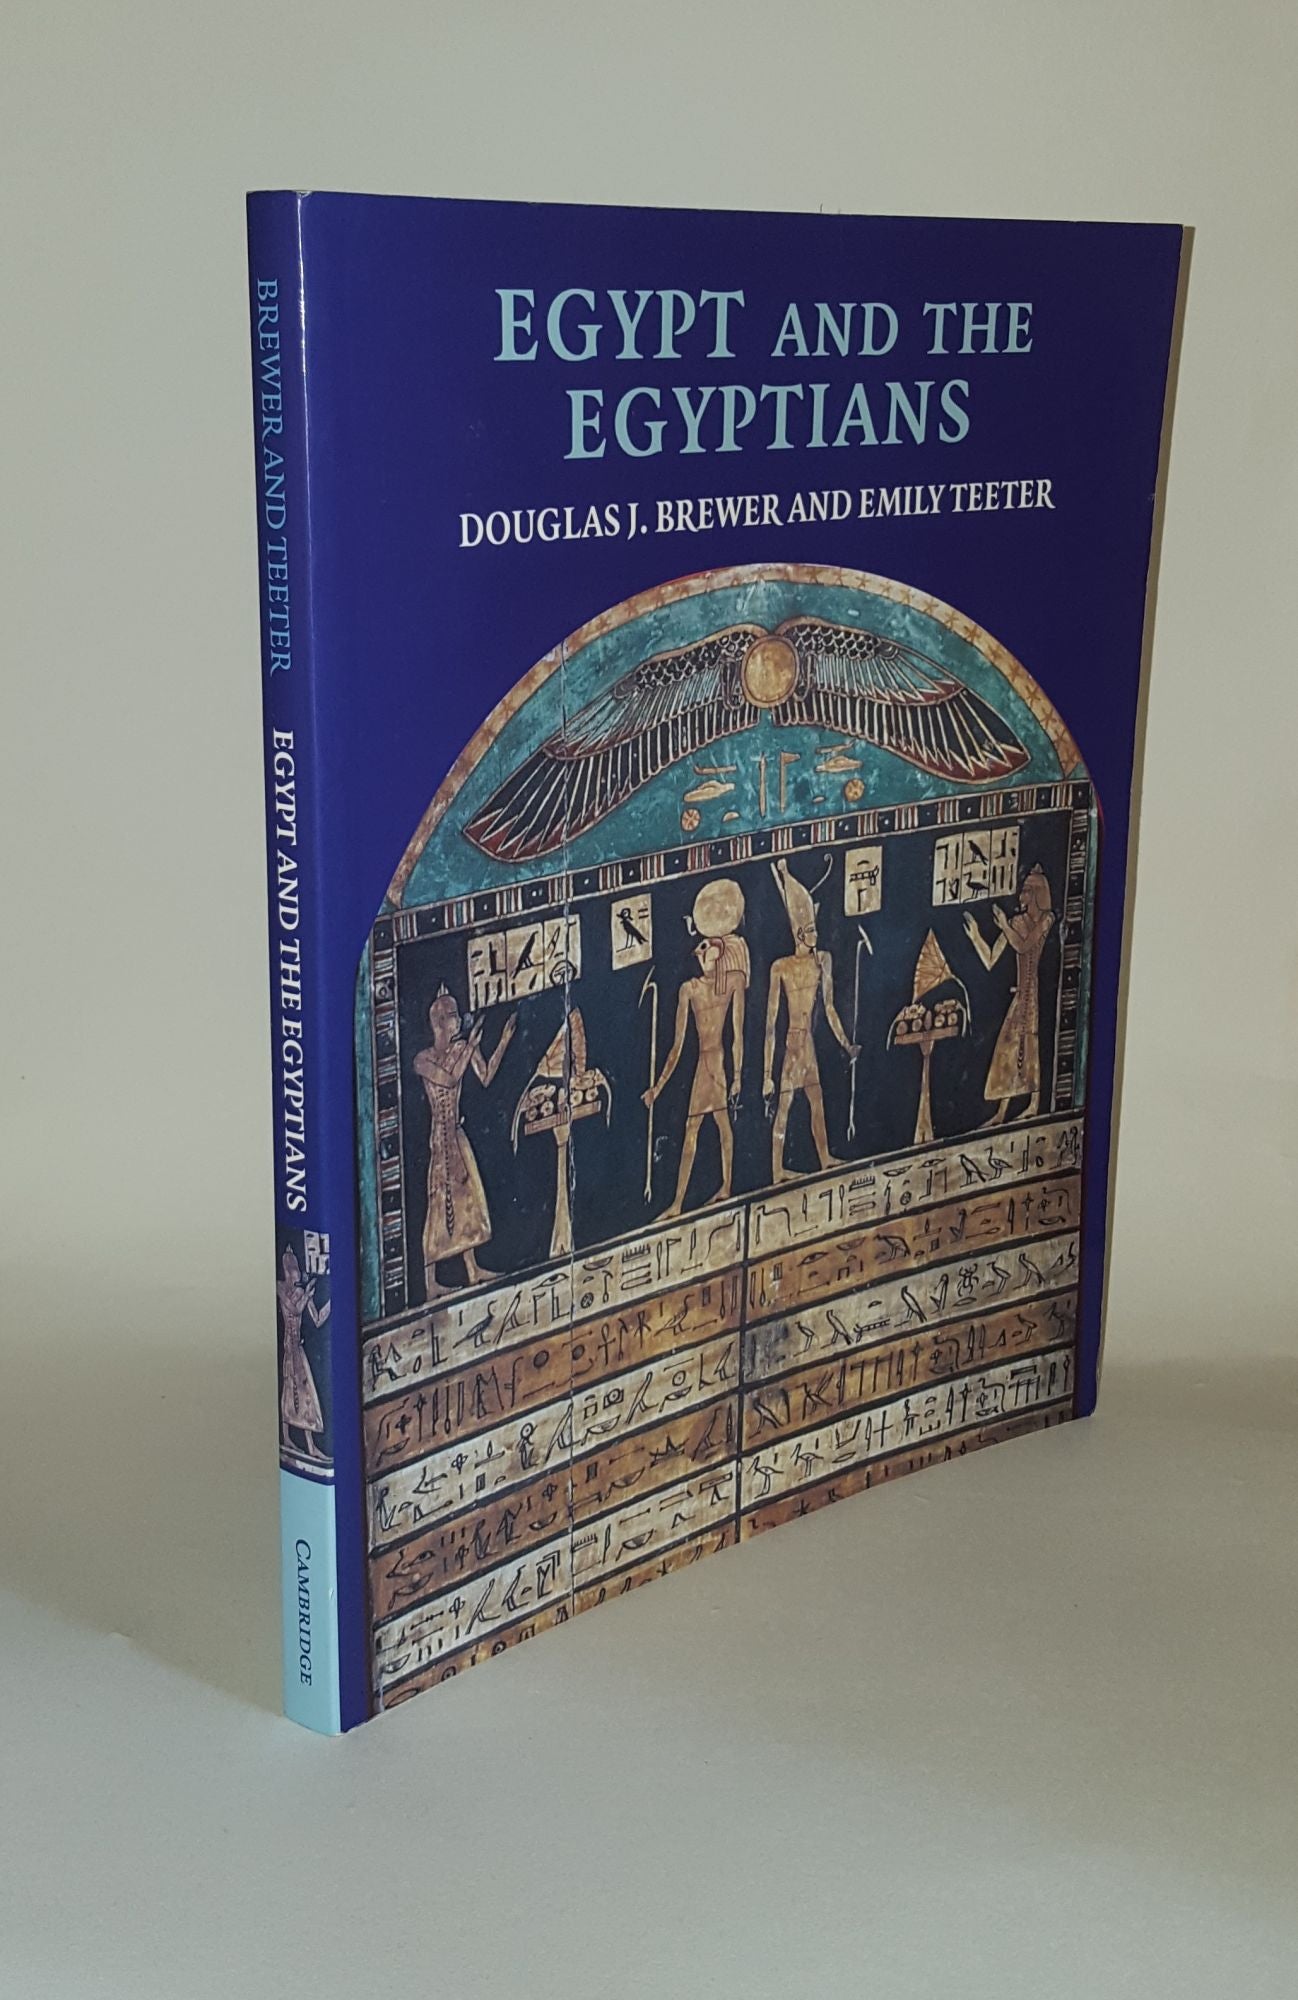 BREWER Douglas J., TEETER Emily - Egypt and the Egyptians